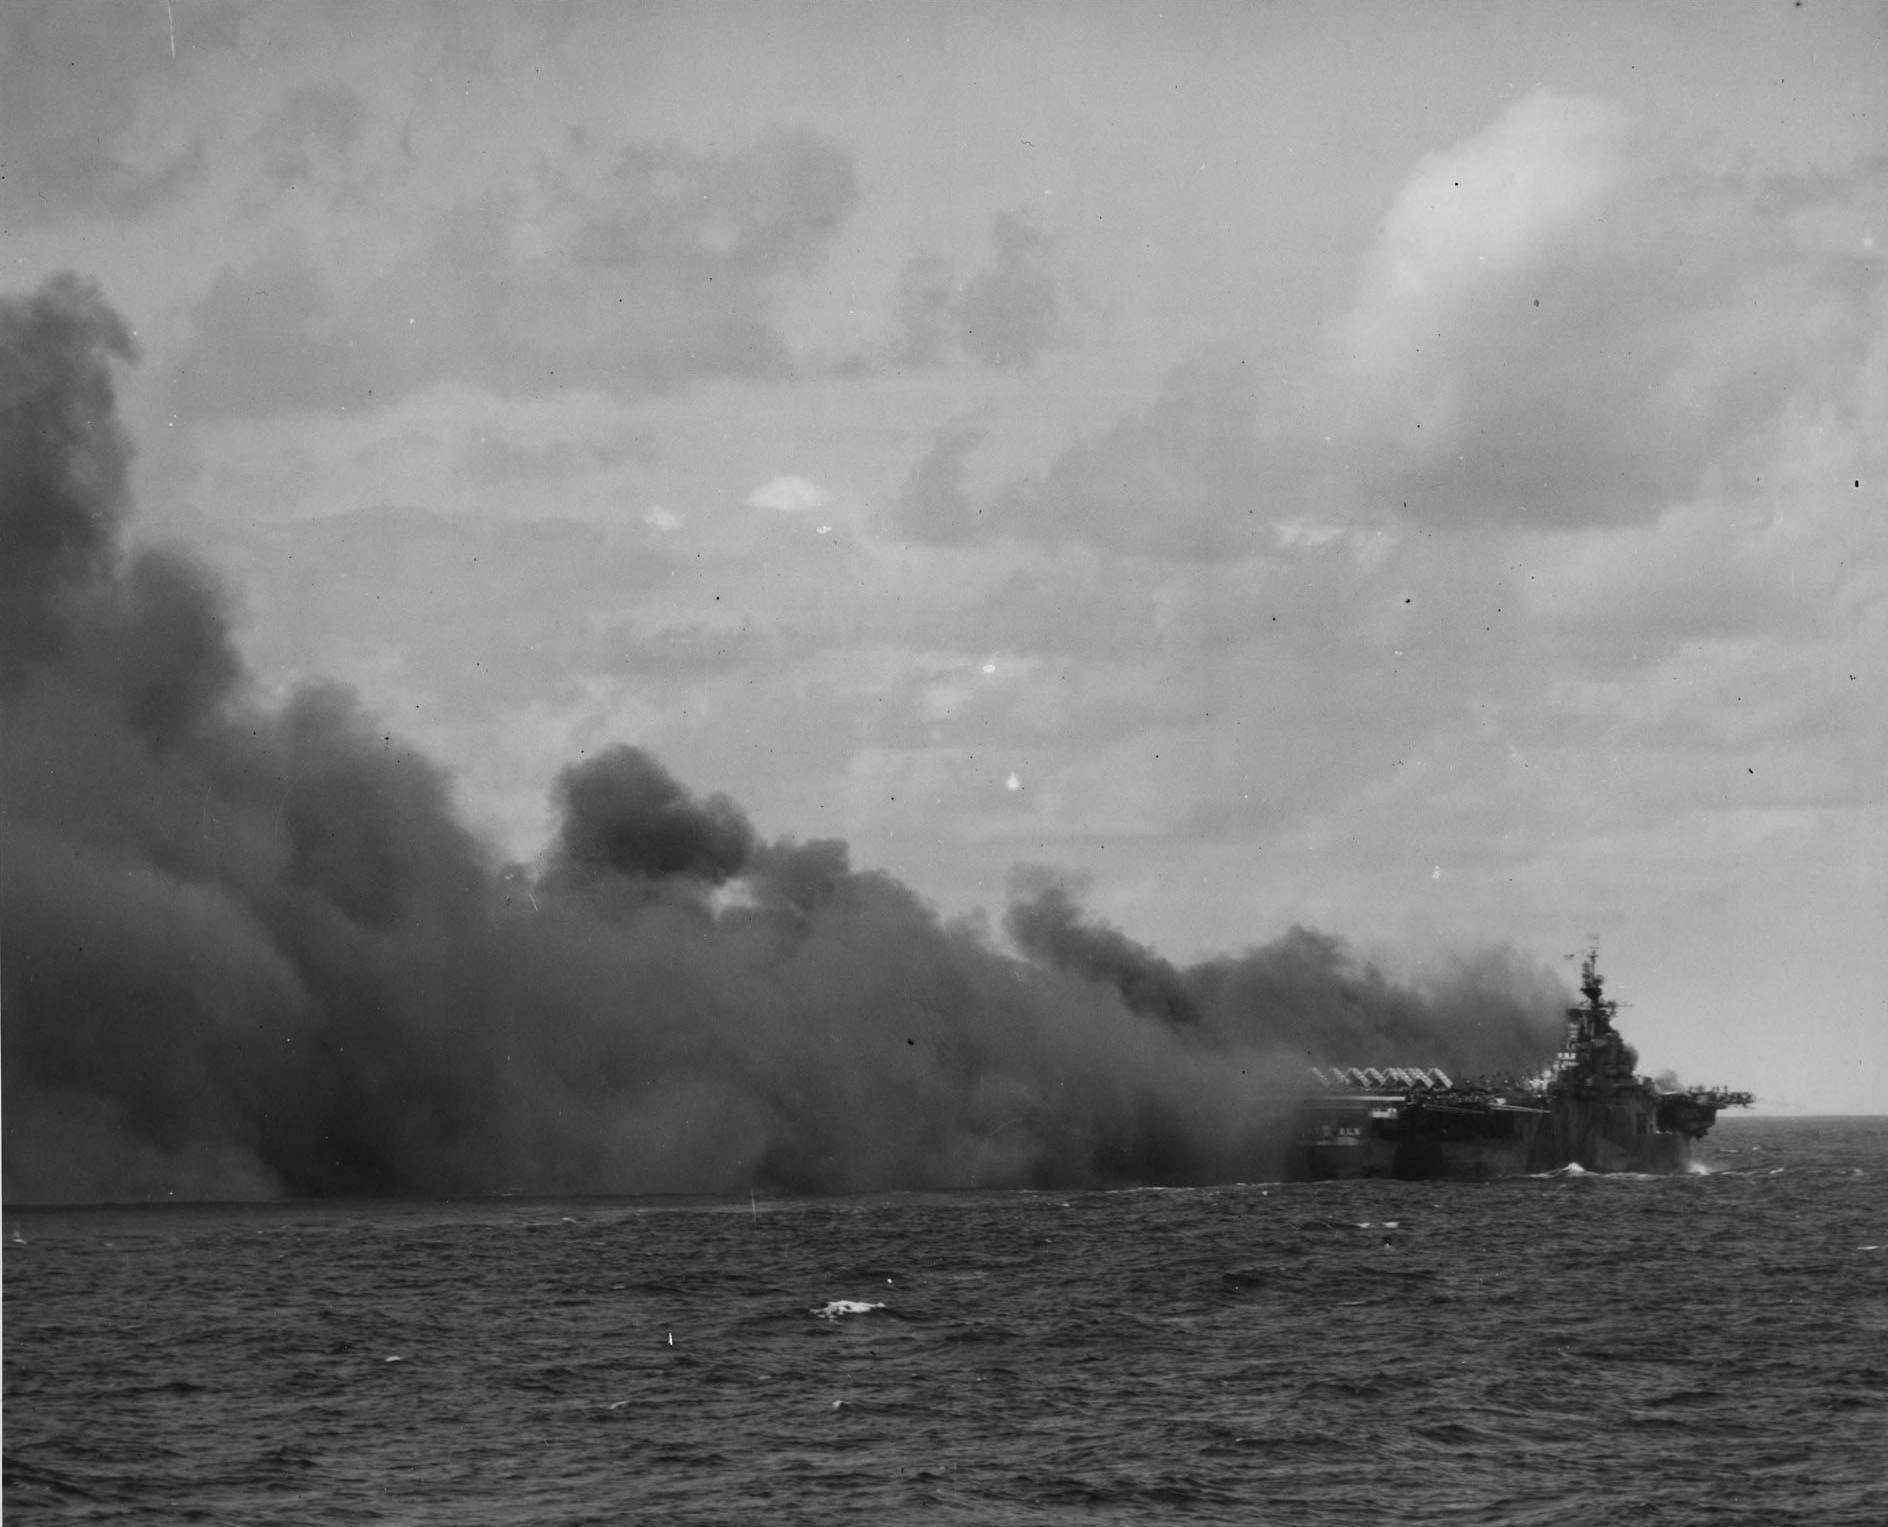 Ticonderoga shrouded in smoke after being hit by two kamikaze aircraft, 125 miles east-southeast of Taiwan, about 1300 hours on 21 Jan 1945